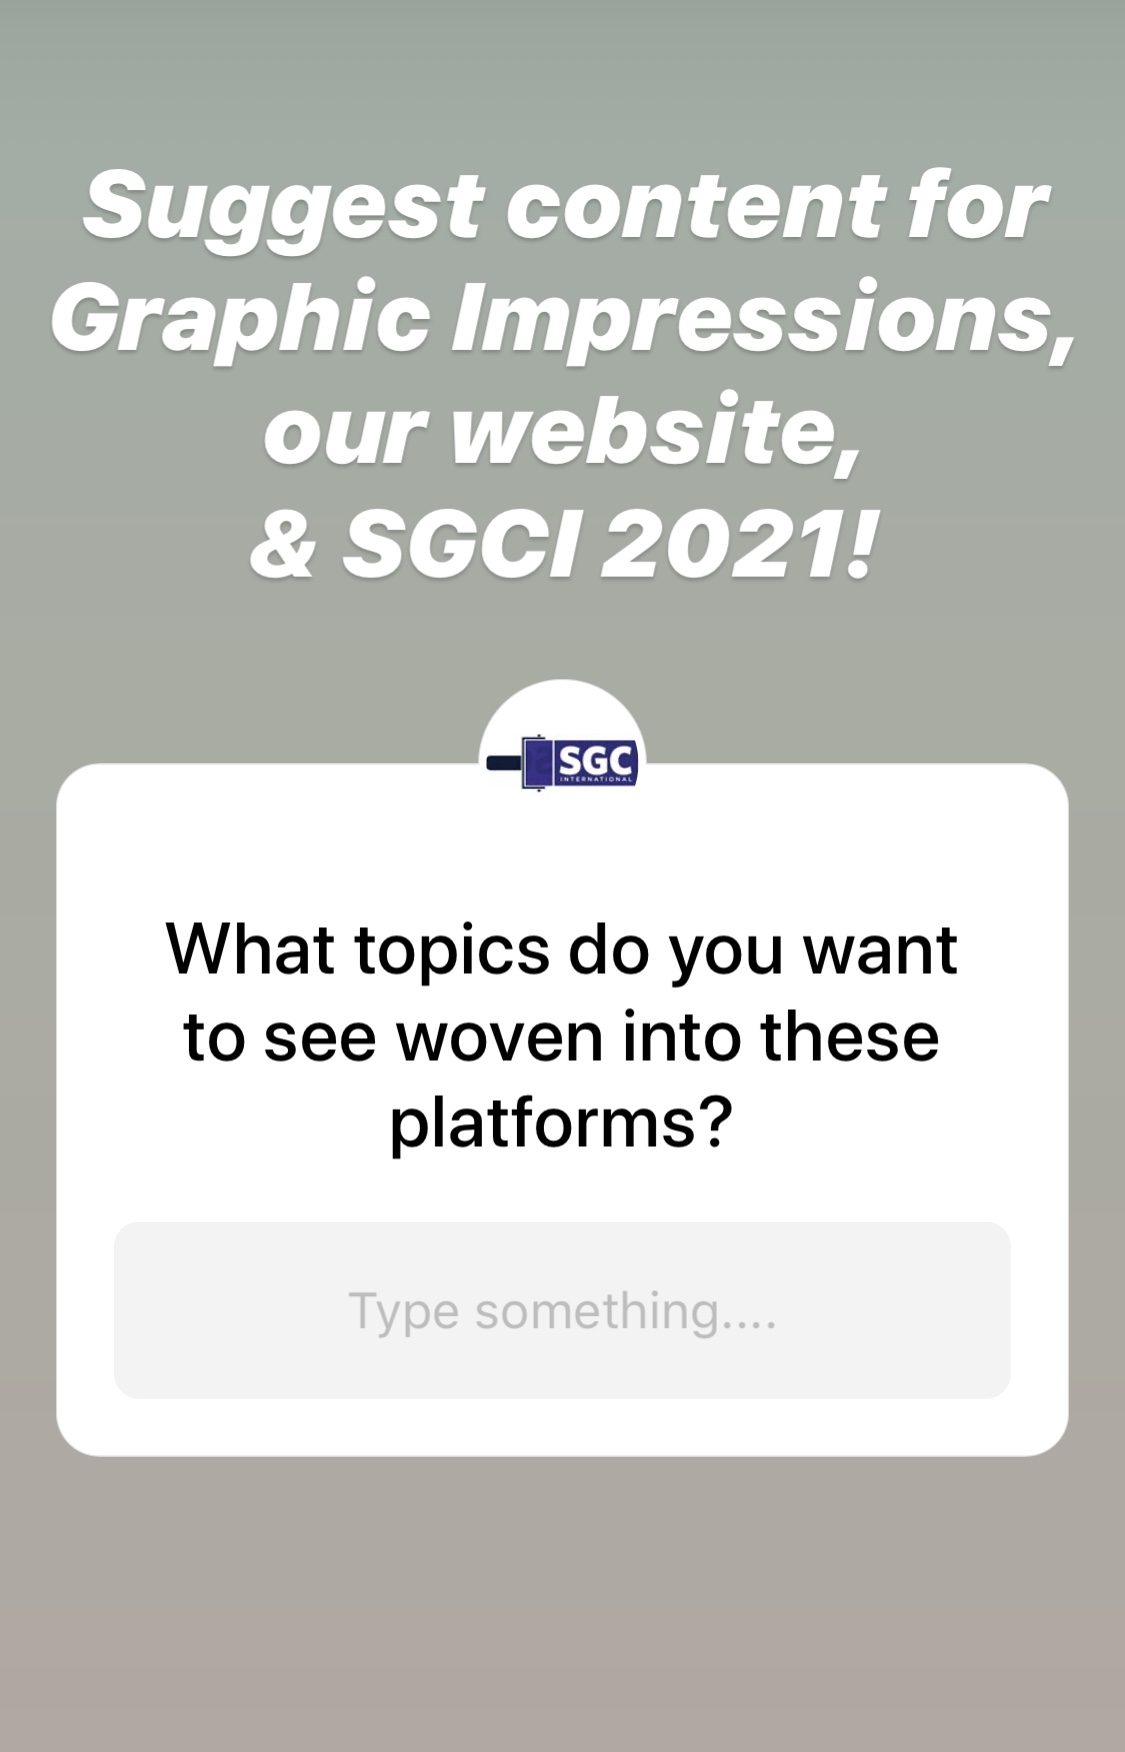 Suggest content for Graphic Impressions, our website, and SGCI 2021!